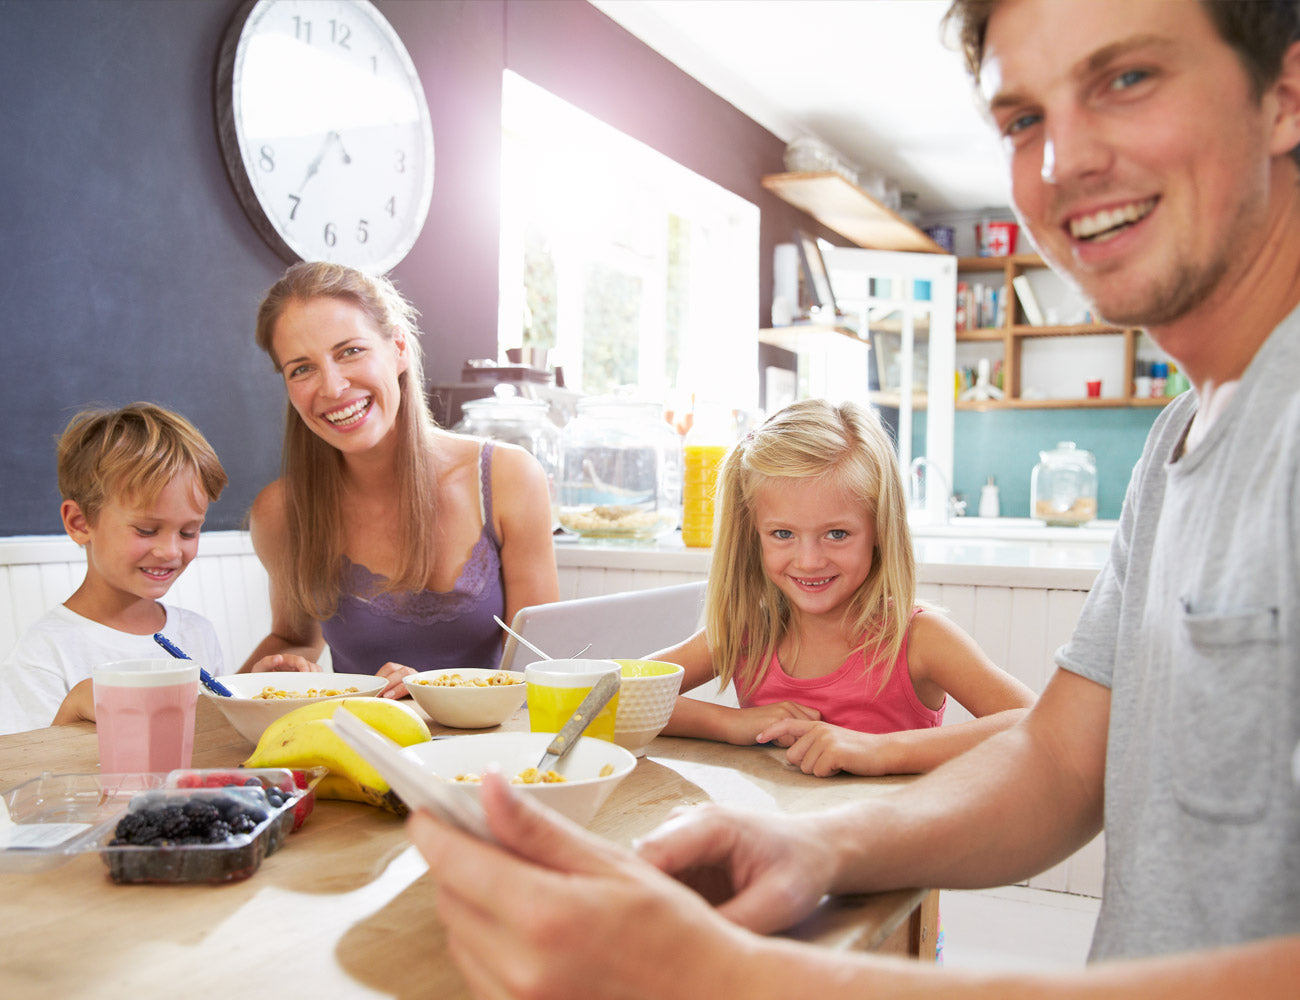 10 Tips For A Great Start To Your Day For Families!